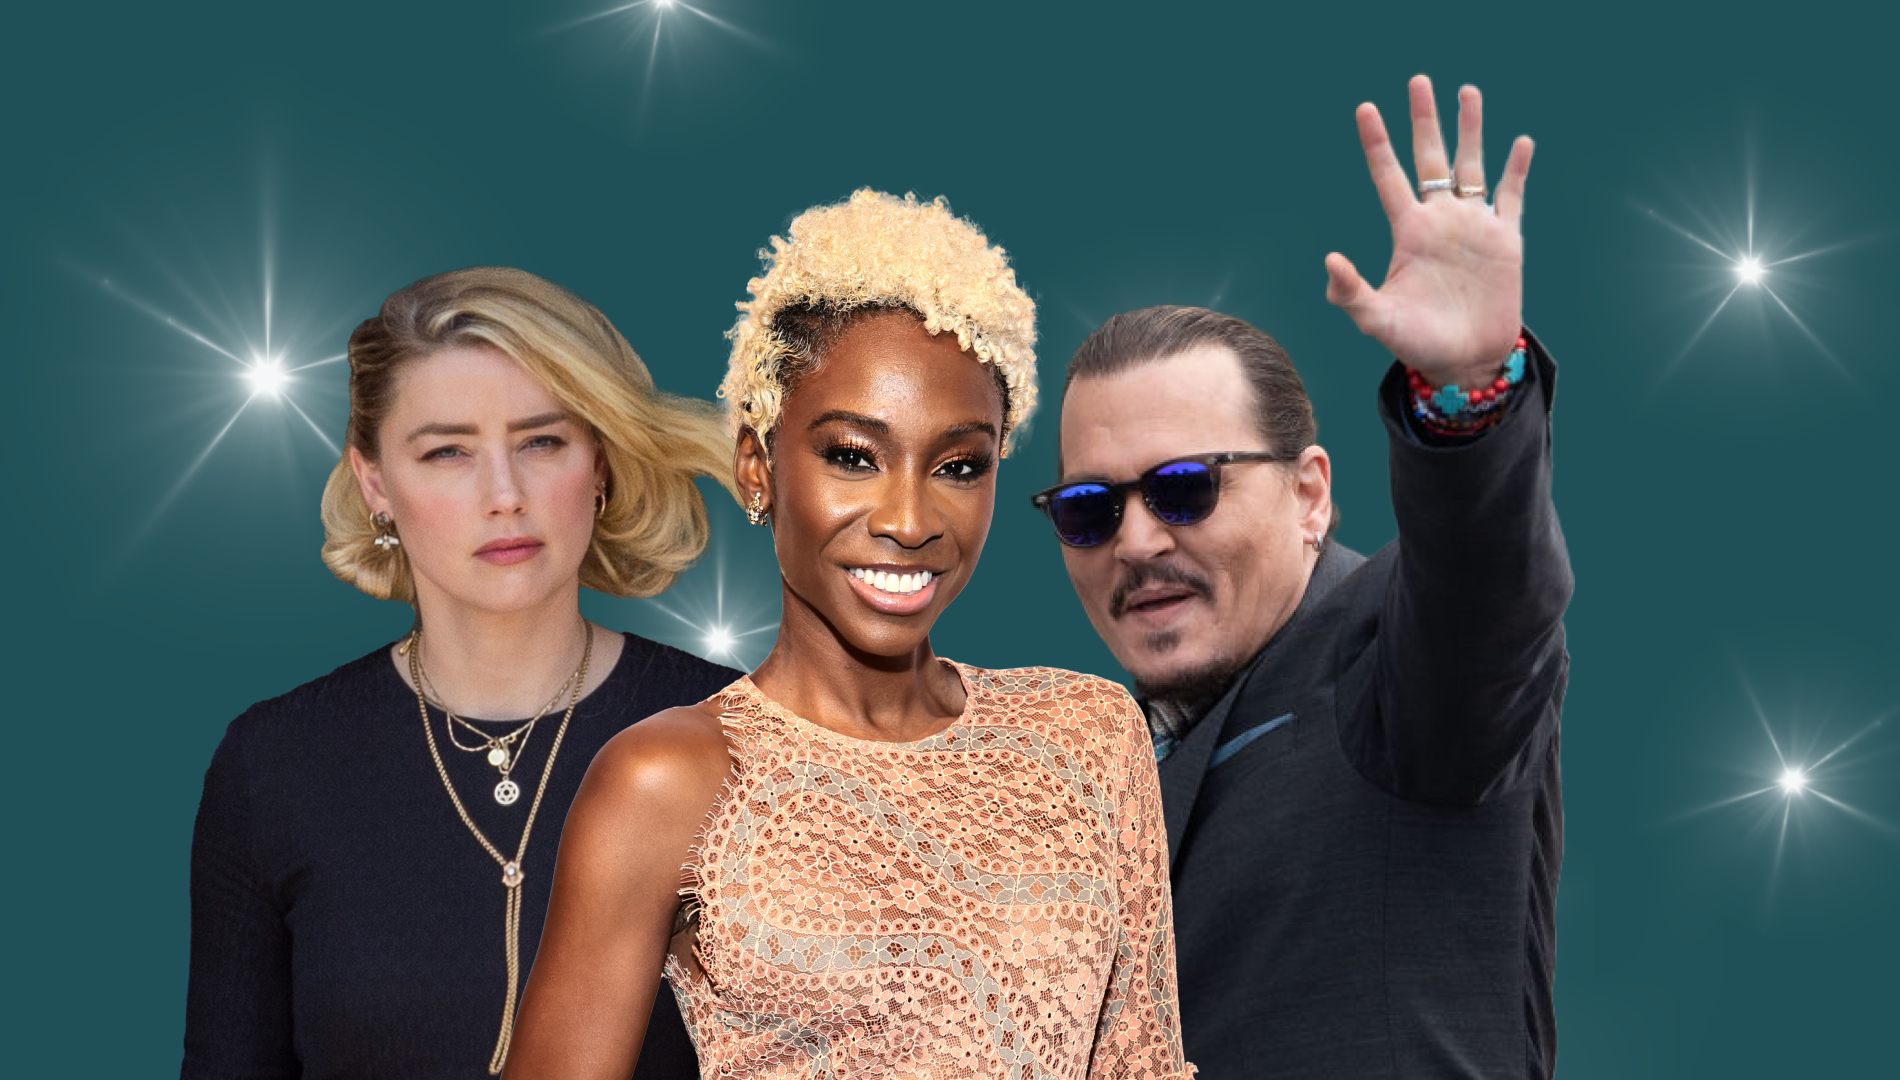 Pop Cultured with theSkimm promo image for June 7, 2022 featuring Angelica Ross, Amber Heard, and Johnny Depp.